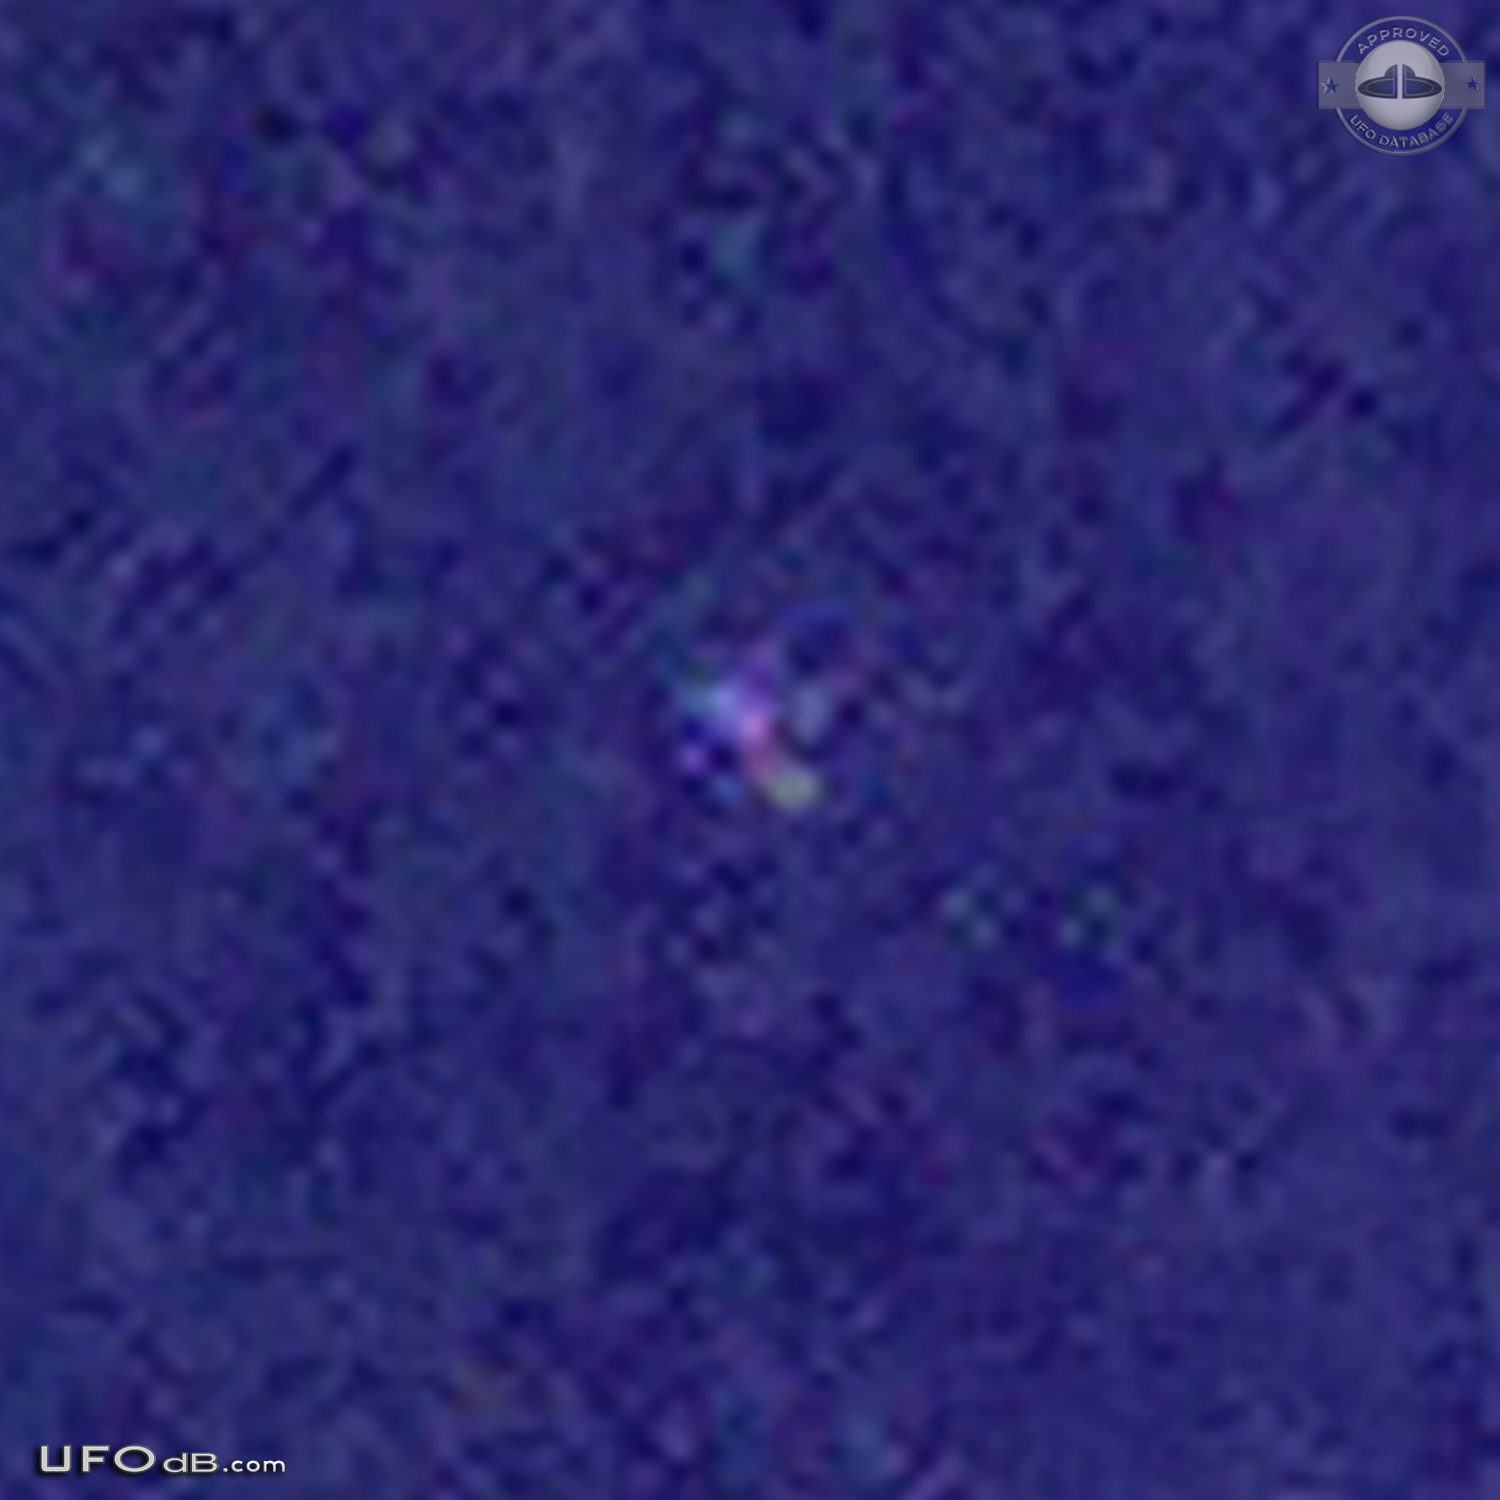 Coloful twinkling Star shaped UFO seen over Chicago, Illinois  2012 UFO Picture #500-4